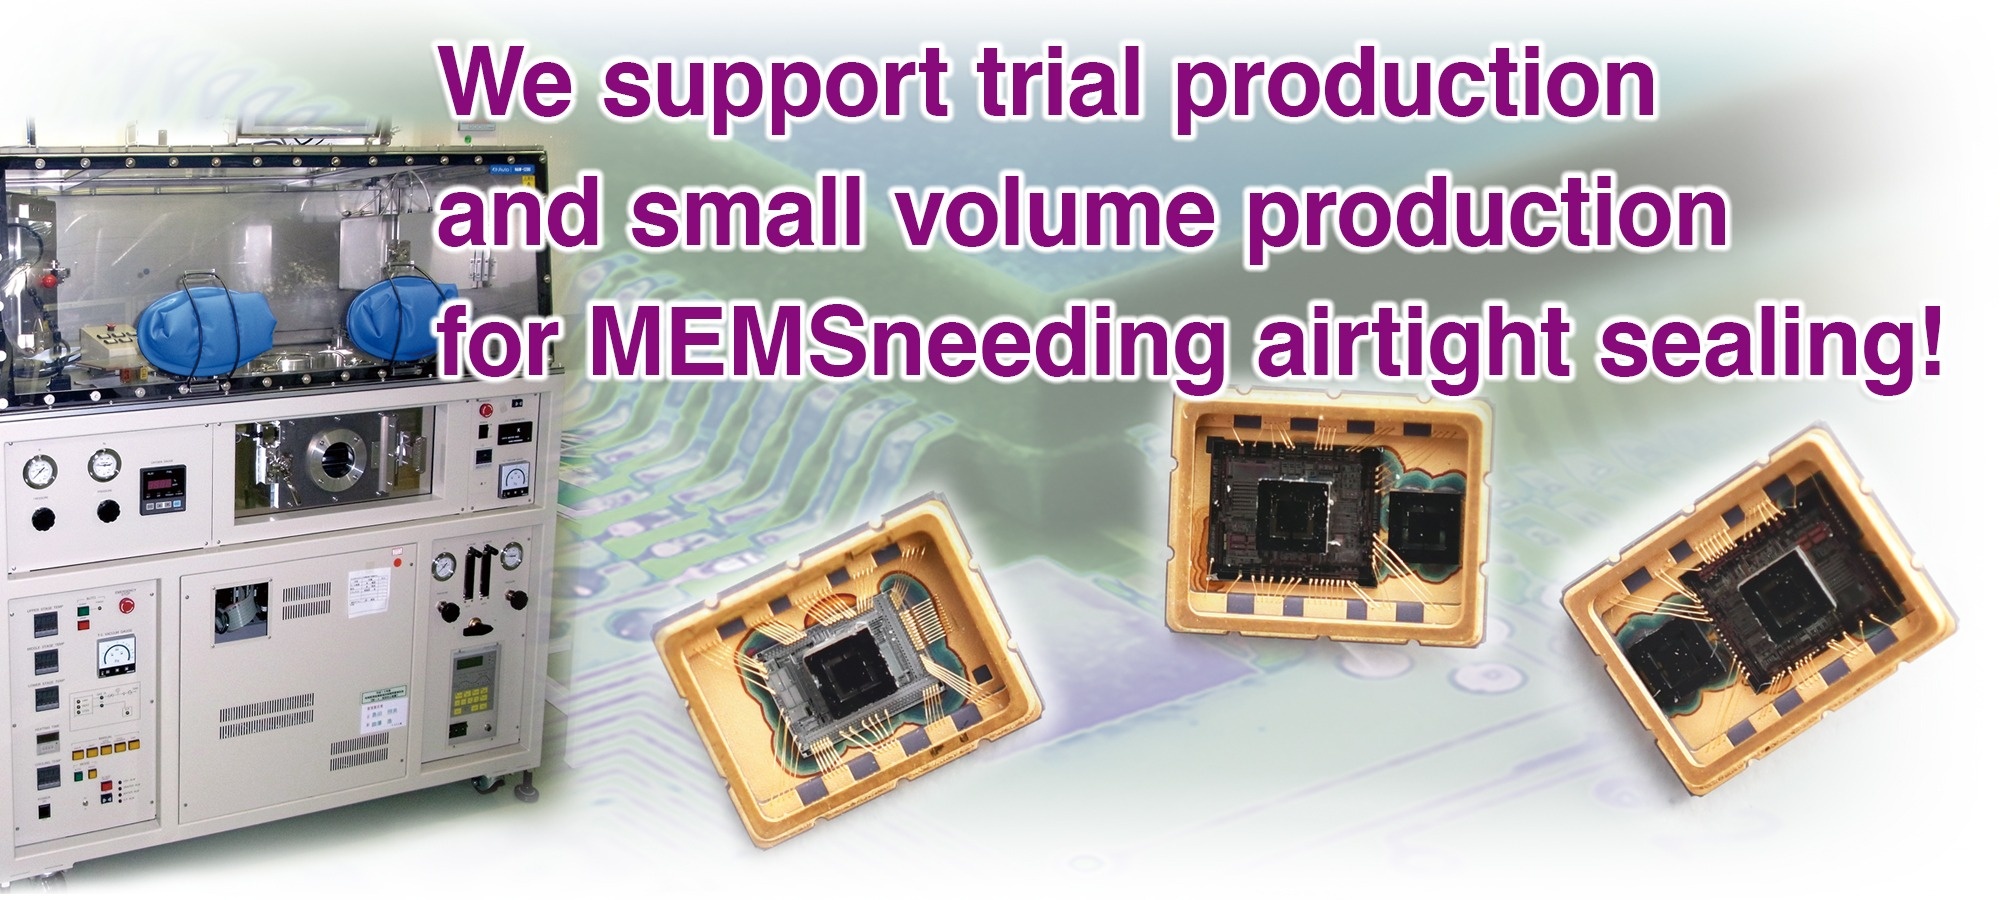 We support trial production and small volume production for MEMS needing airtight sealing!